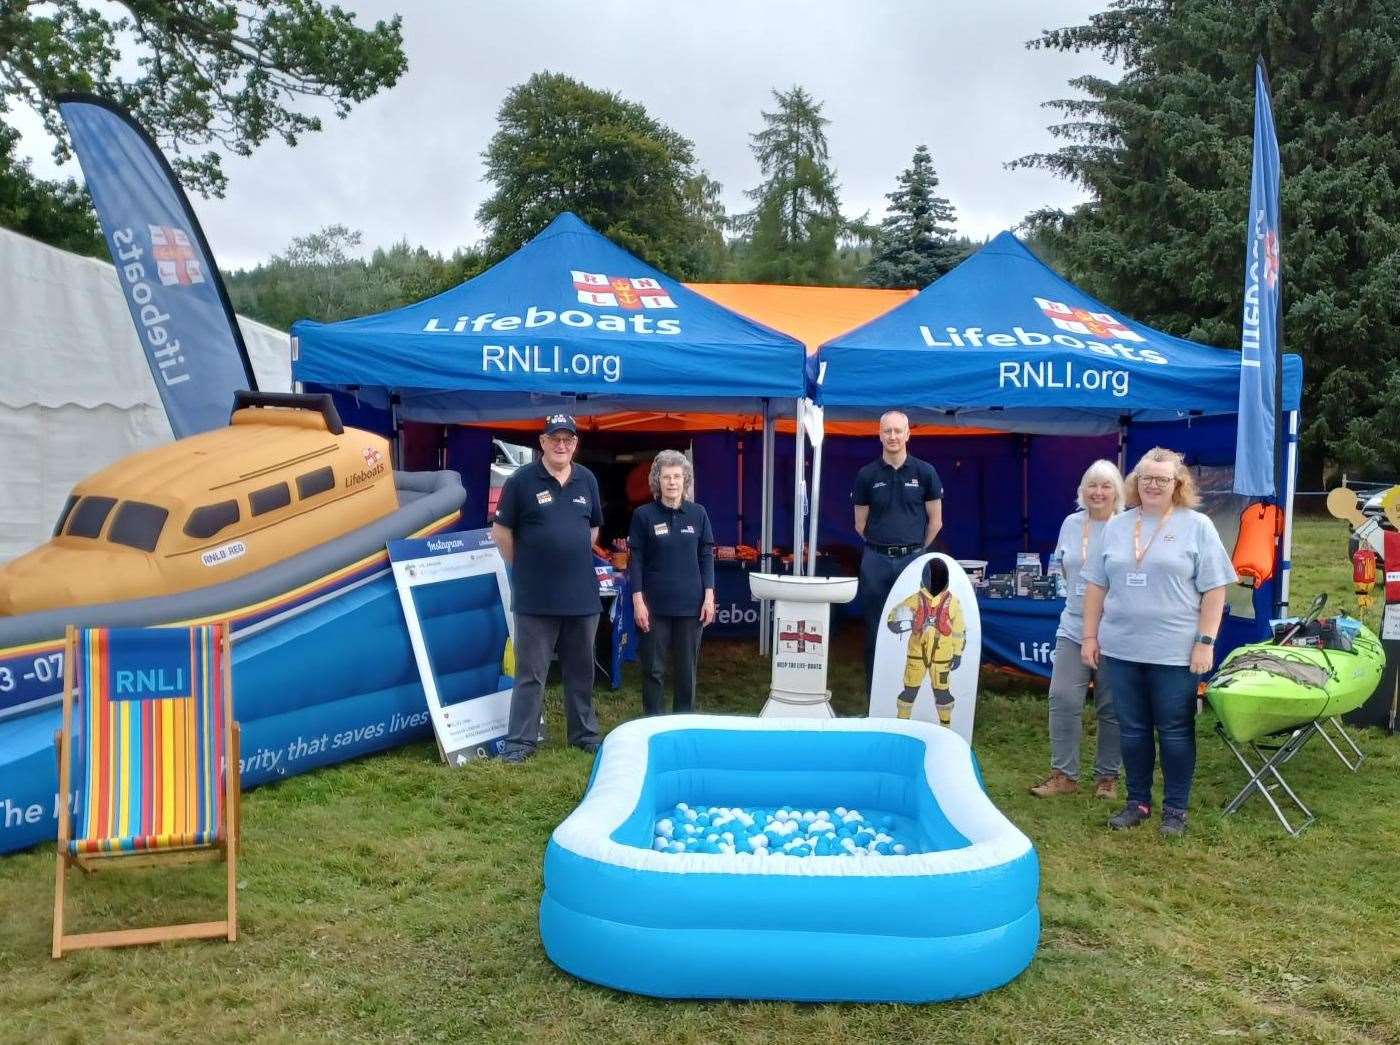 The RNLI attended last year's event